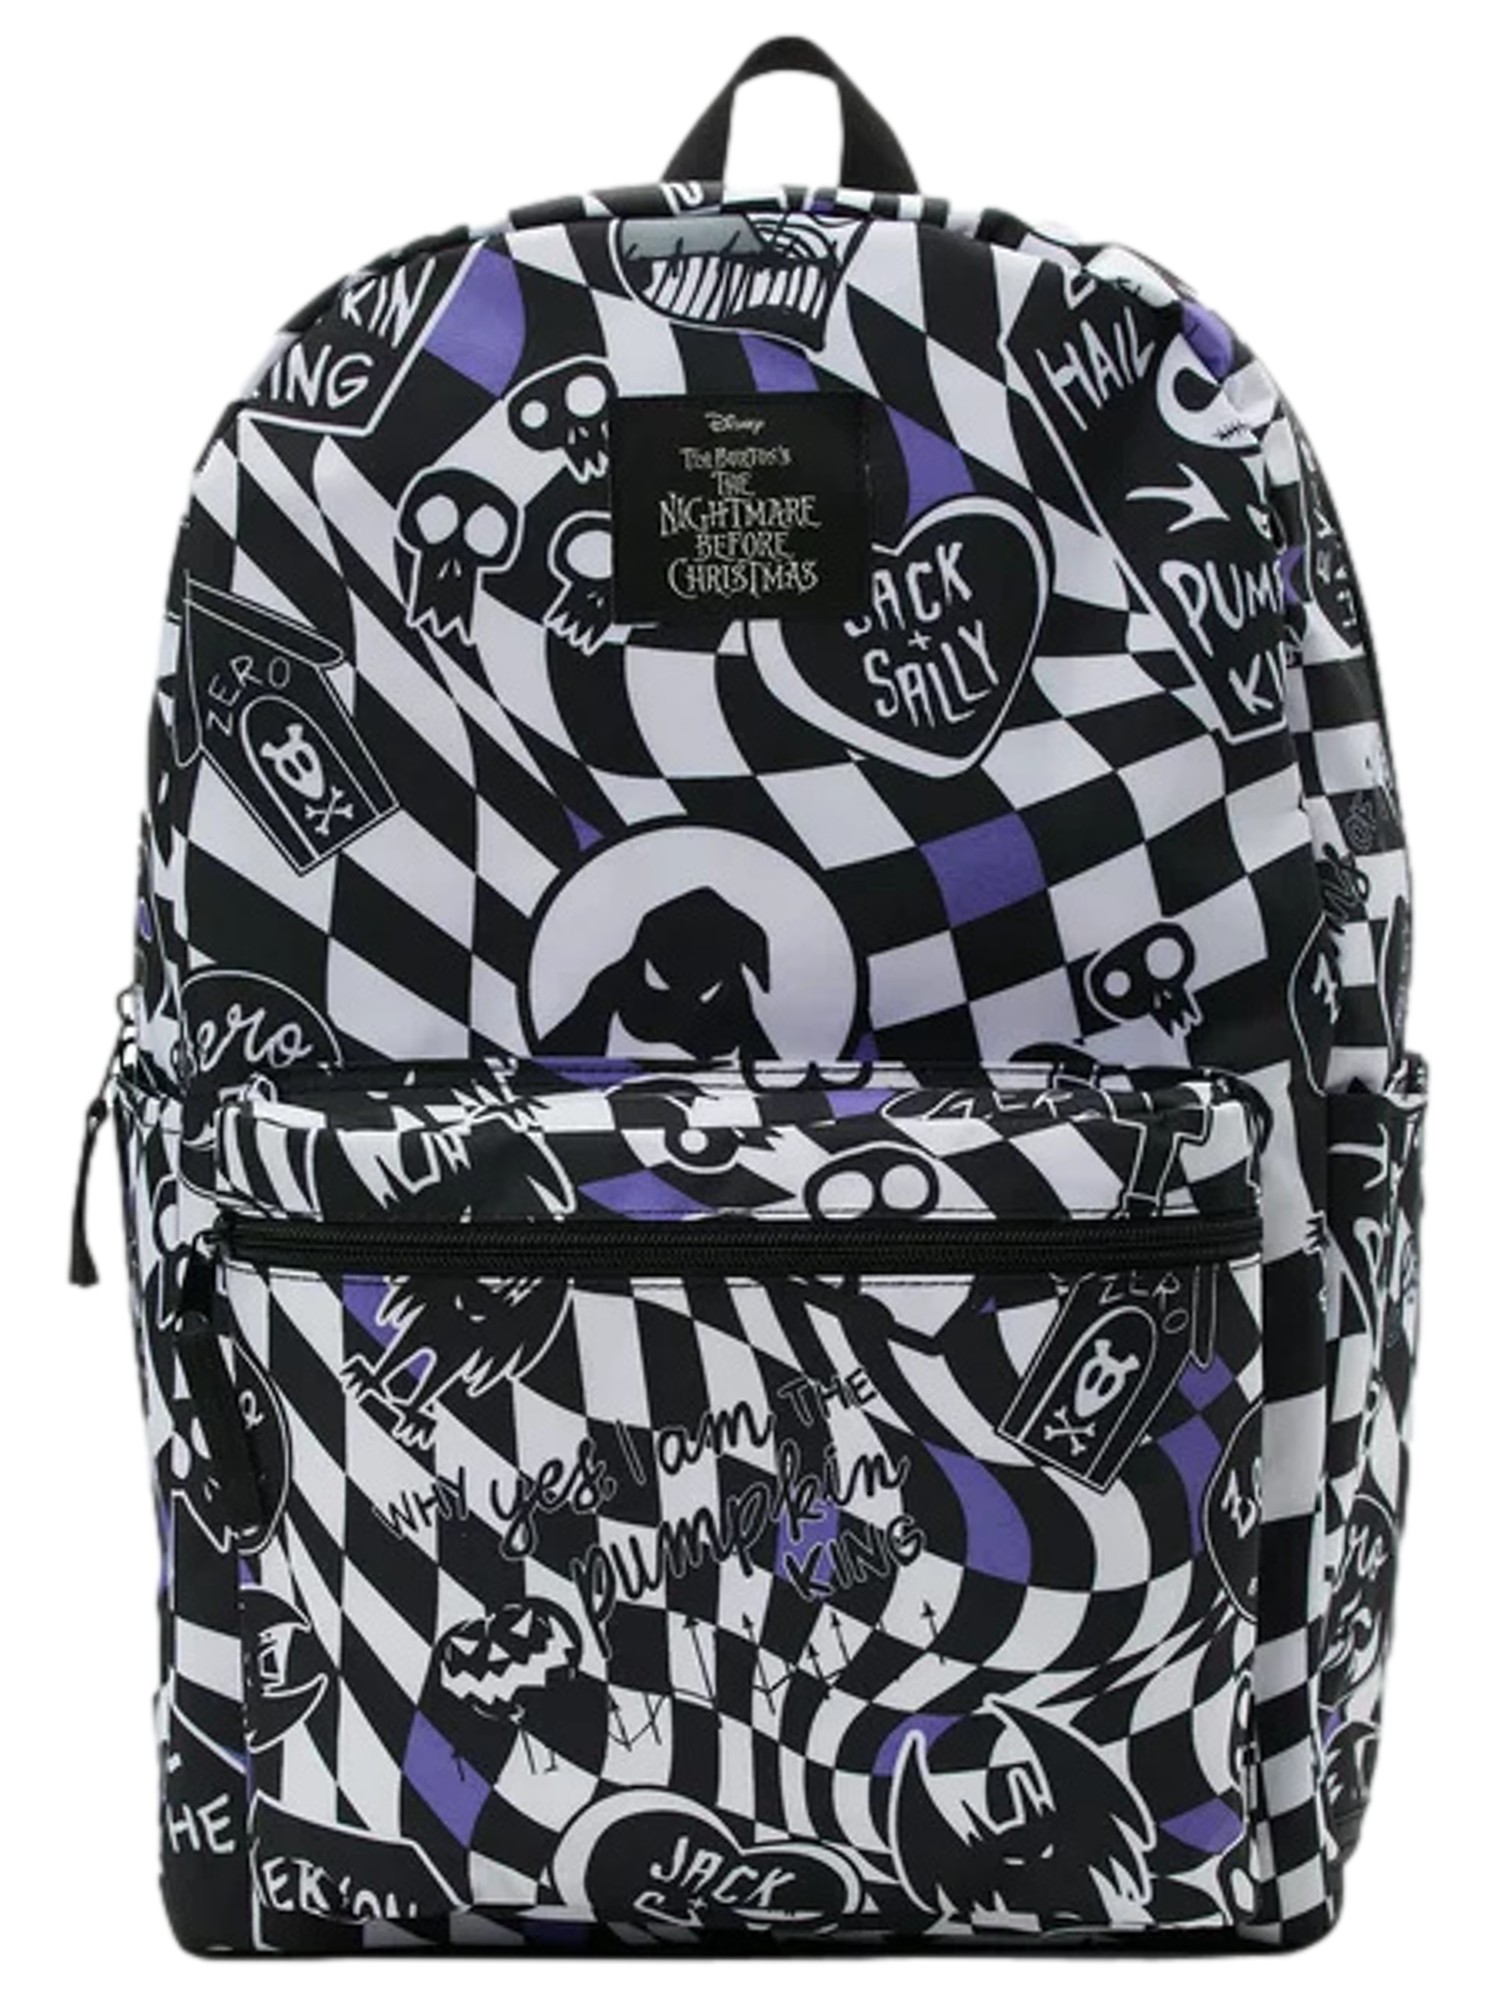 Disney The Nightmare Before Christmas 17" Laptop Backpack, Black All Over Print